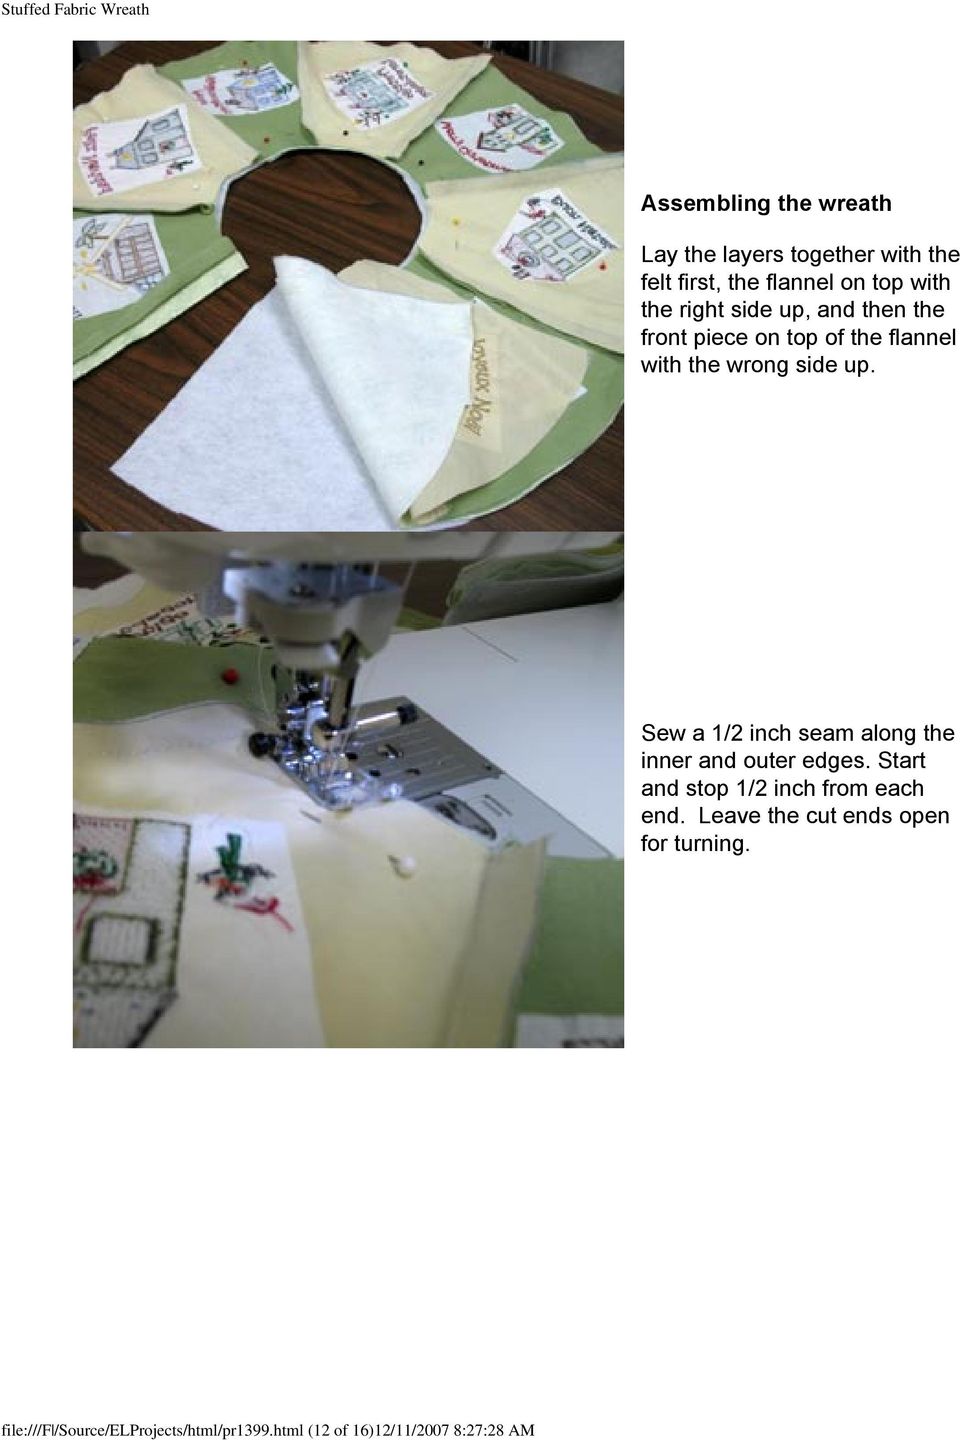 Sew a 1/2 inch seam along the inner and outer edges. Start and stop 1/2 inch from each end.